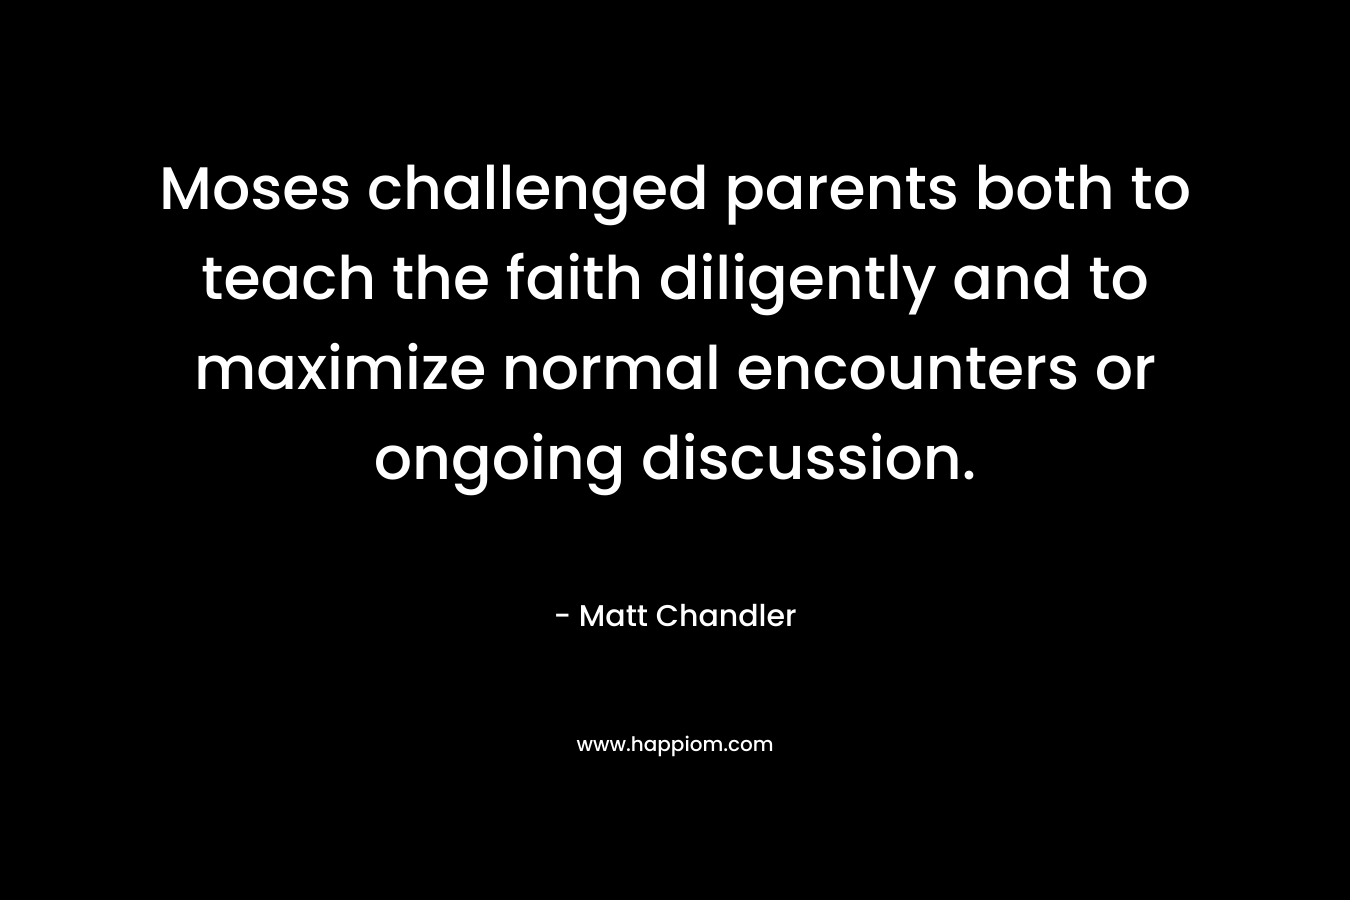 Moses challenged parents both to teach the faith diligently and to maximize normal encounters or ongoing discussion.